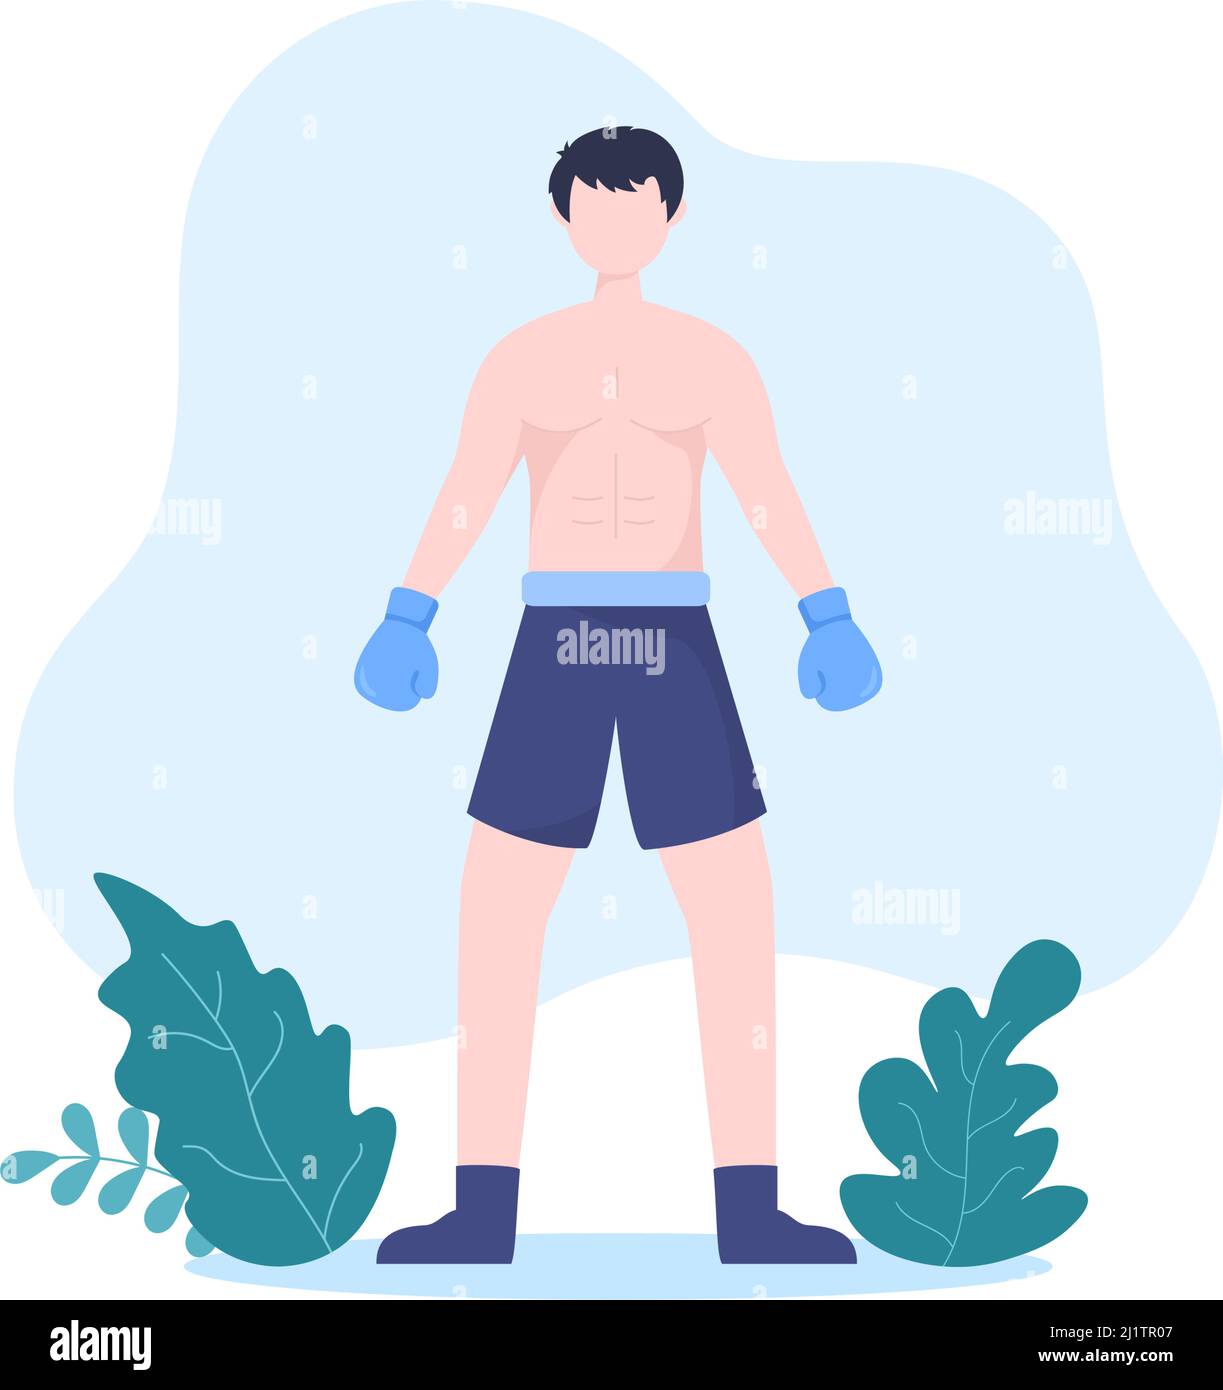 Punch boxing comic style and red corner with round:2 Stock Vector